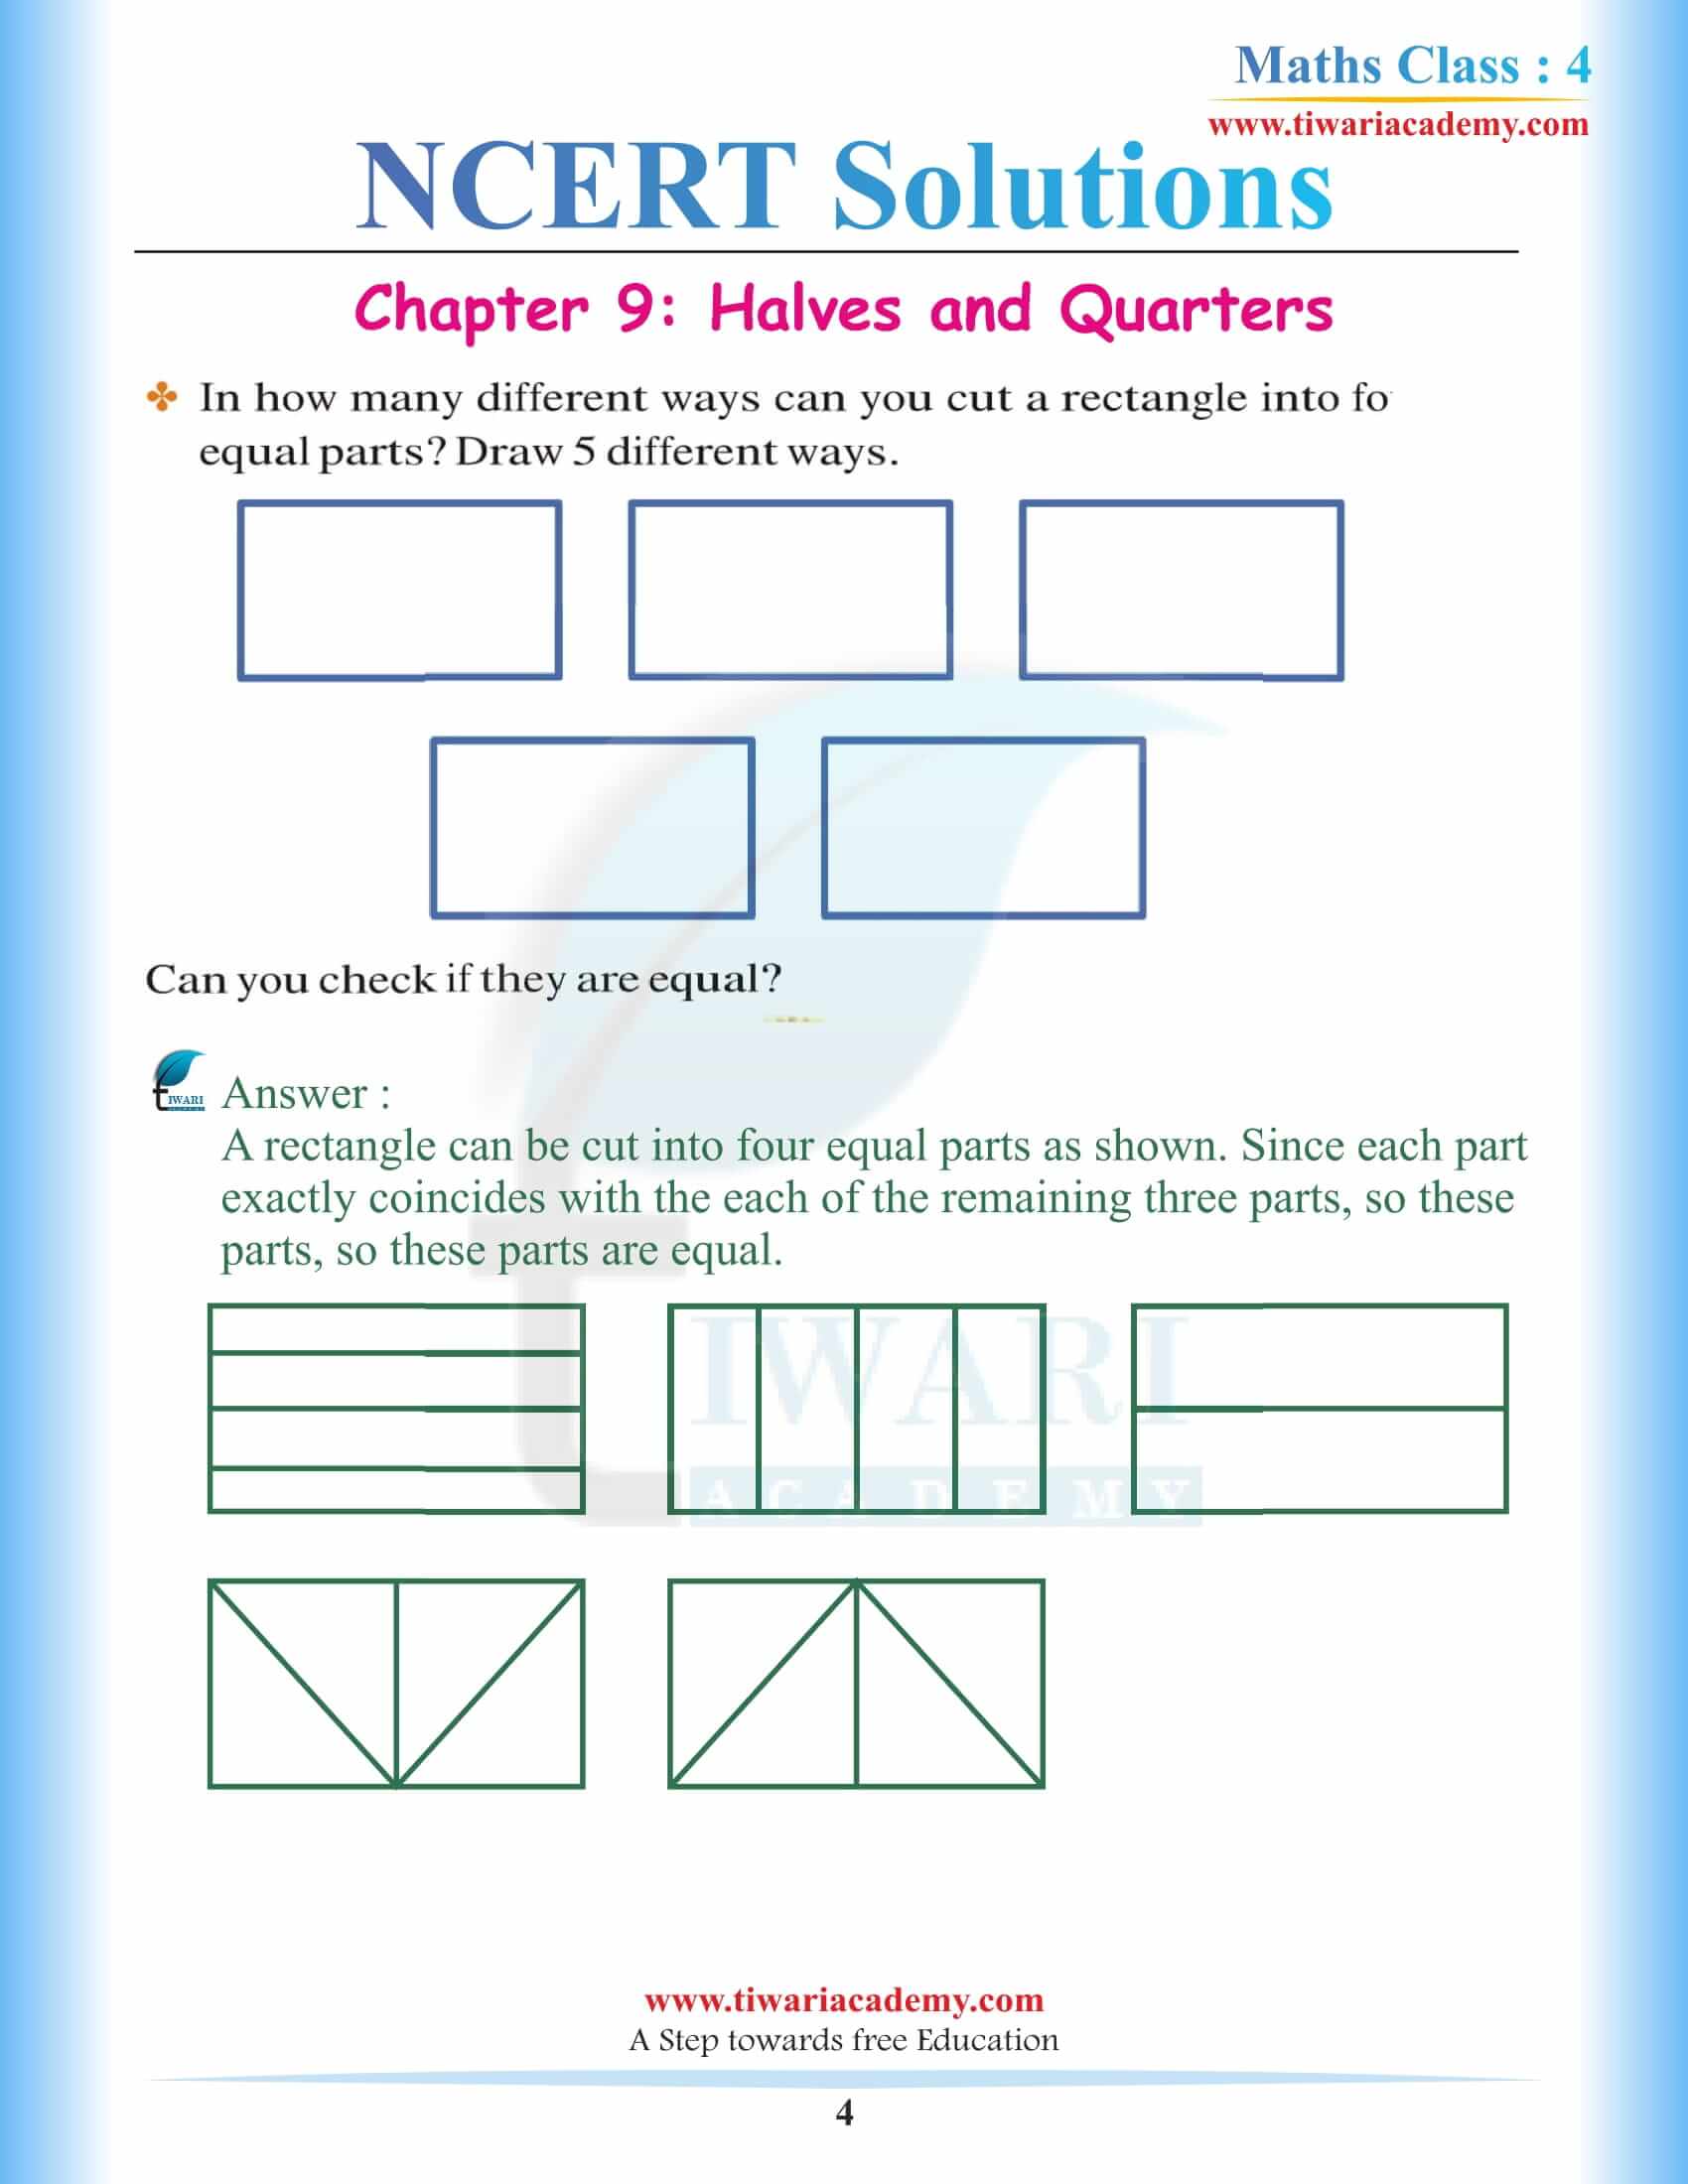 NCERT Solutions for Class 4 Maths Chapter 9 free